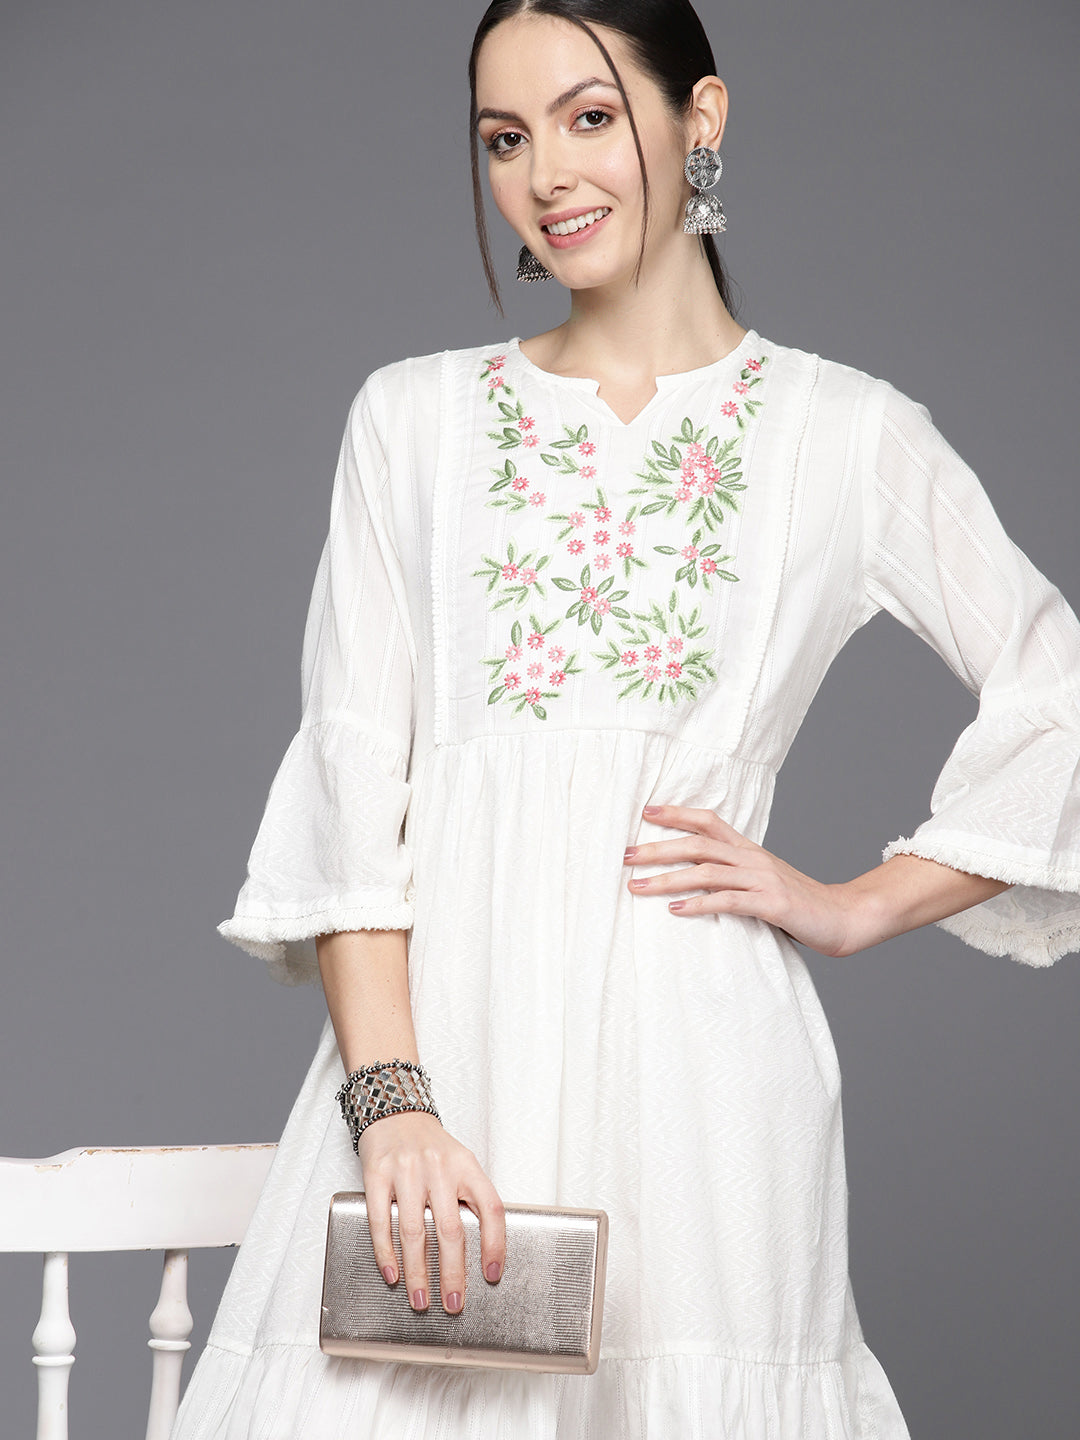 Indo Era White Floral Embroidered Bell Sleeves Fringed A-Line Ethnic Dress